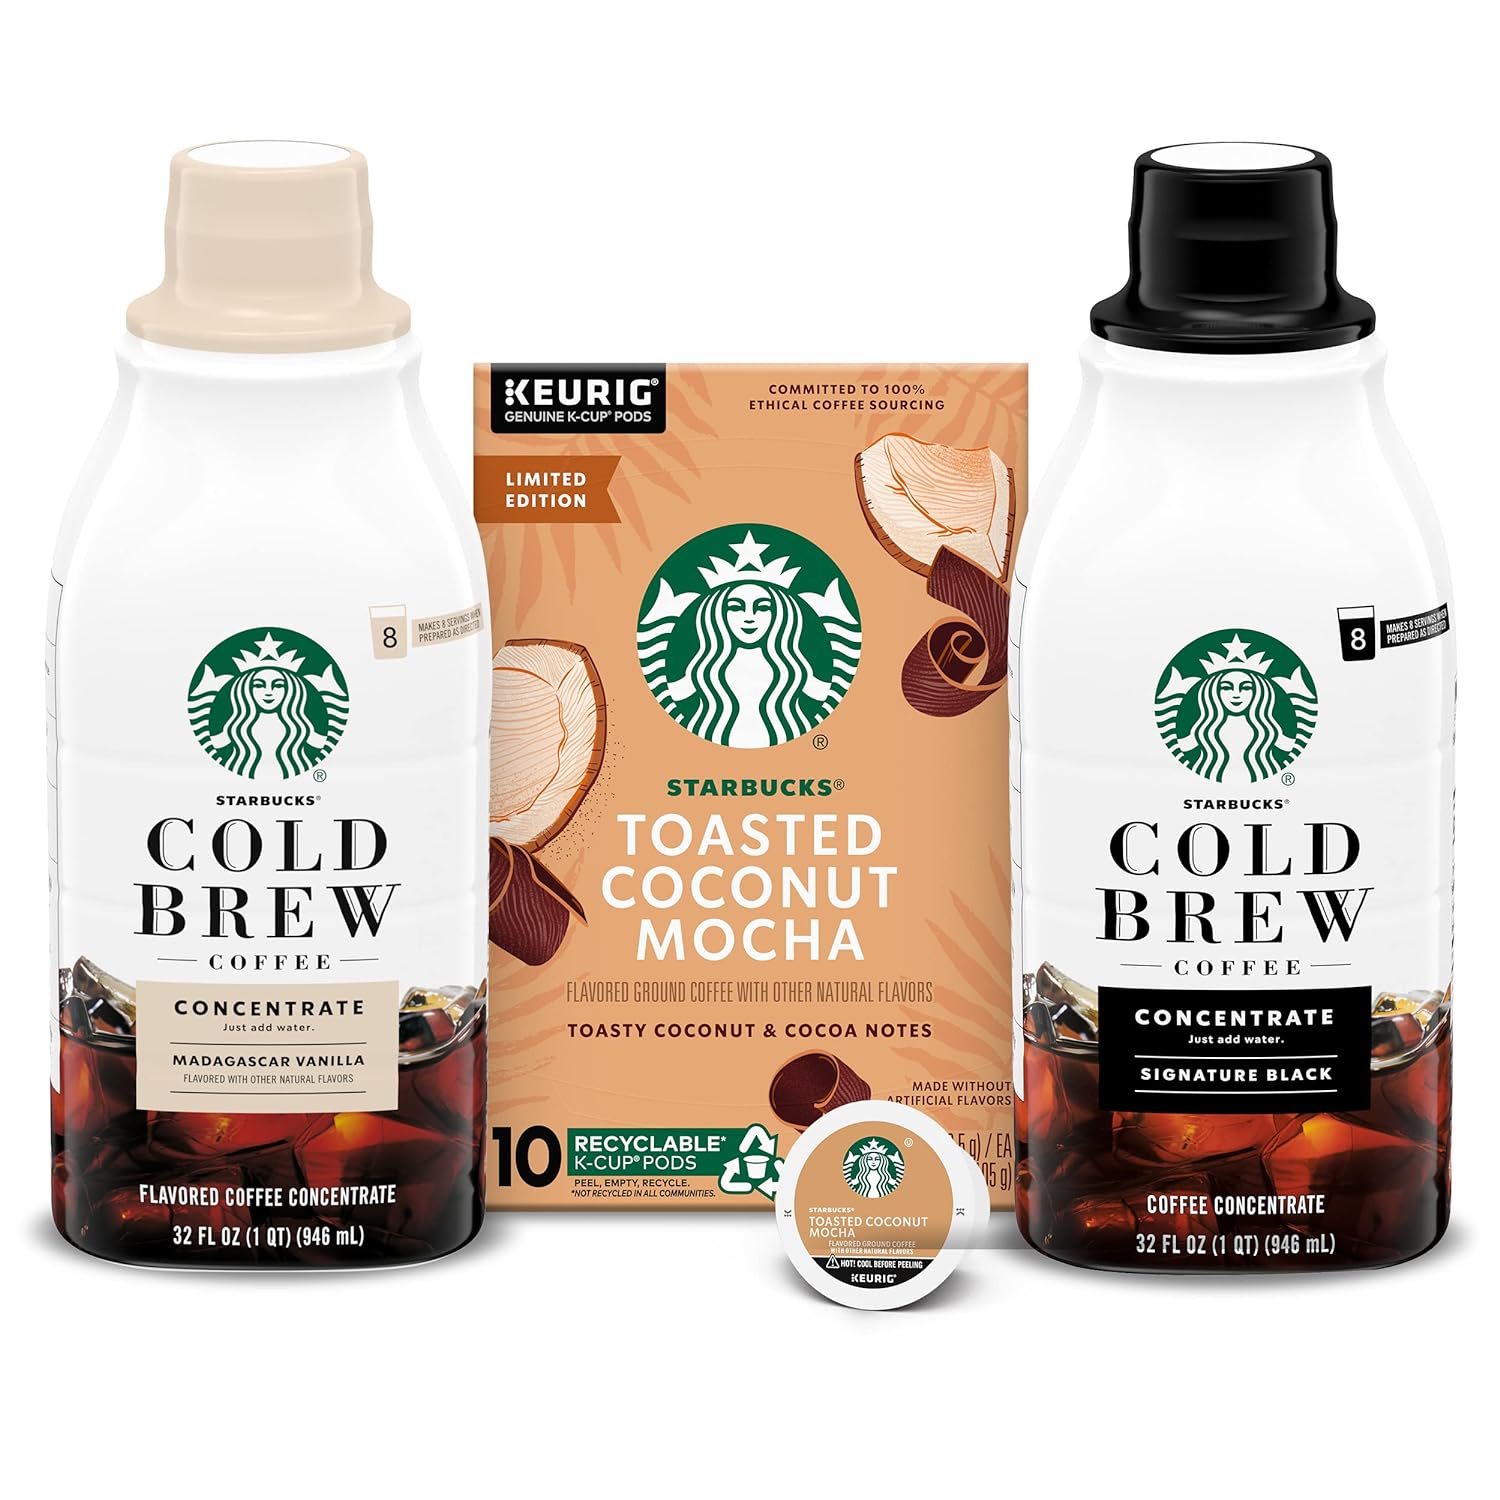 Starbucks Summer Variety Pack, K-Cup Coffee Pods Naturally Flavored Toasted Coconut Mocha And Cold Brew Concentrates Signature Black, Madagascar Vanilla, 100% Arabica, 10 pods And 32 fl oz each